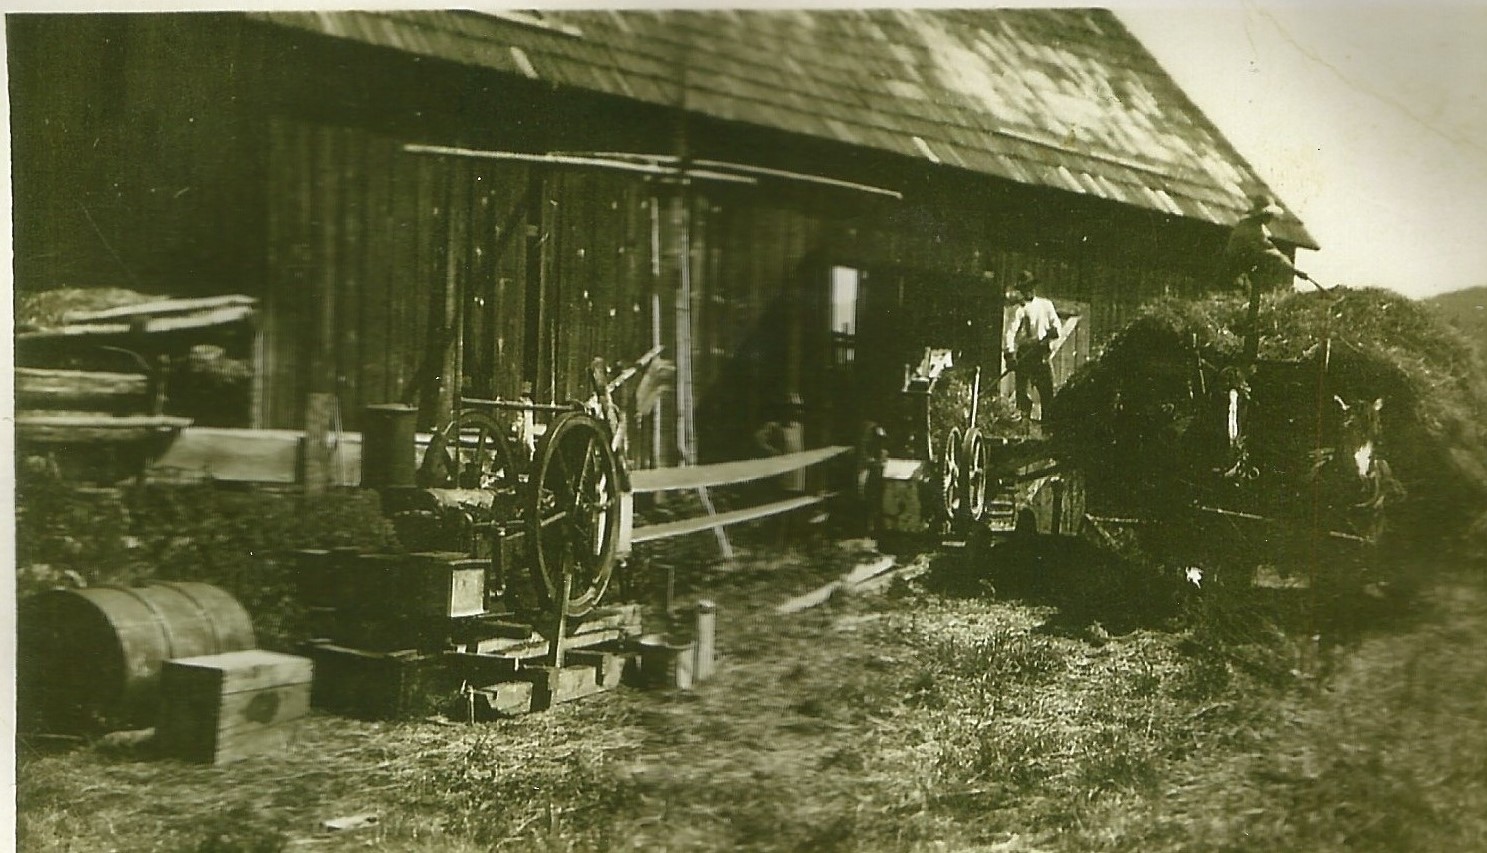 Two horses are hitched to a wagon full of loose hay. The horses are standing beside a barn. 2 men are using a conveyor belt and forks to unload the hay into the barn.